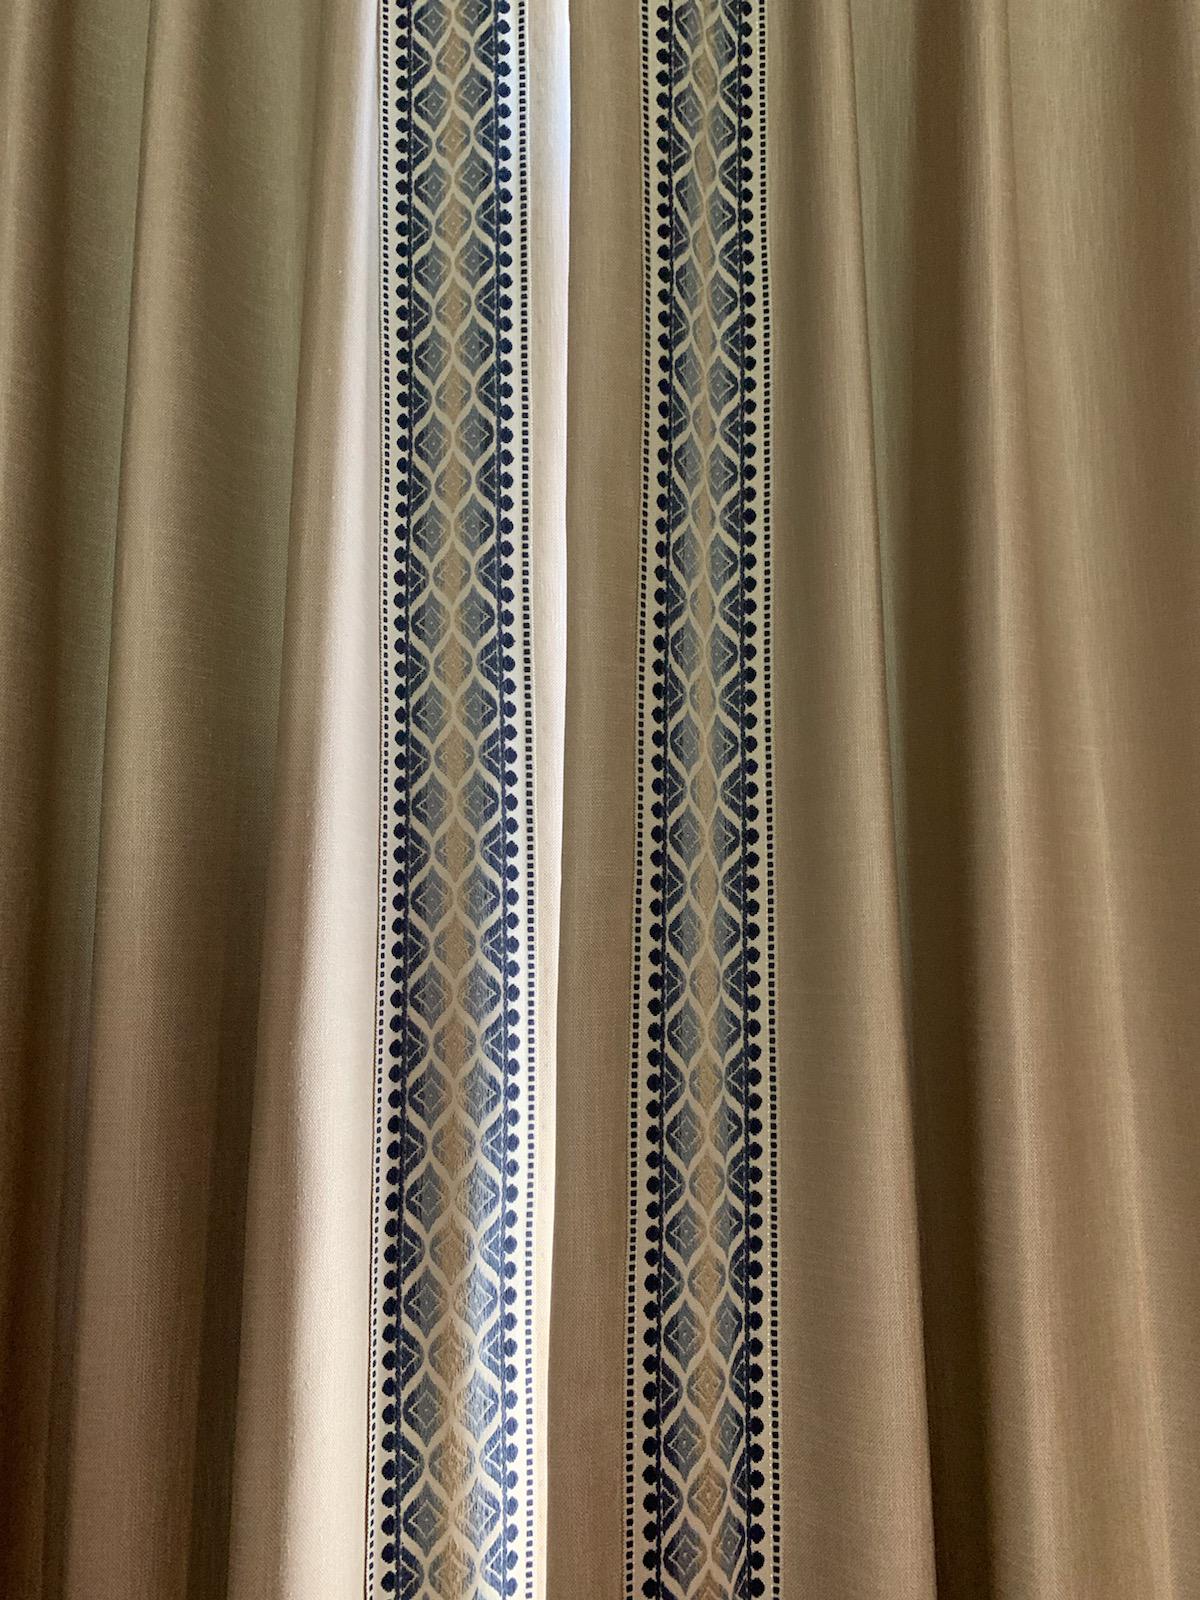 When your décor calls for it, add Banding to your Drapes at the vertical edges where the curtains me Budget Blinds of Knoxville & Maryville Knoxville (865)588-3377